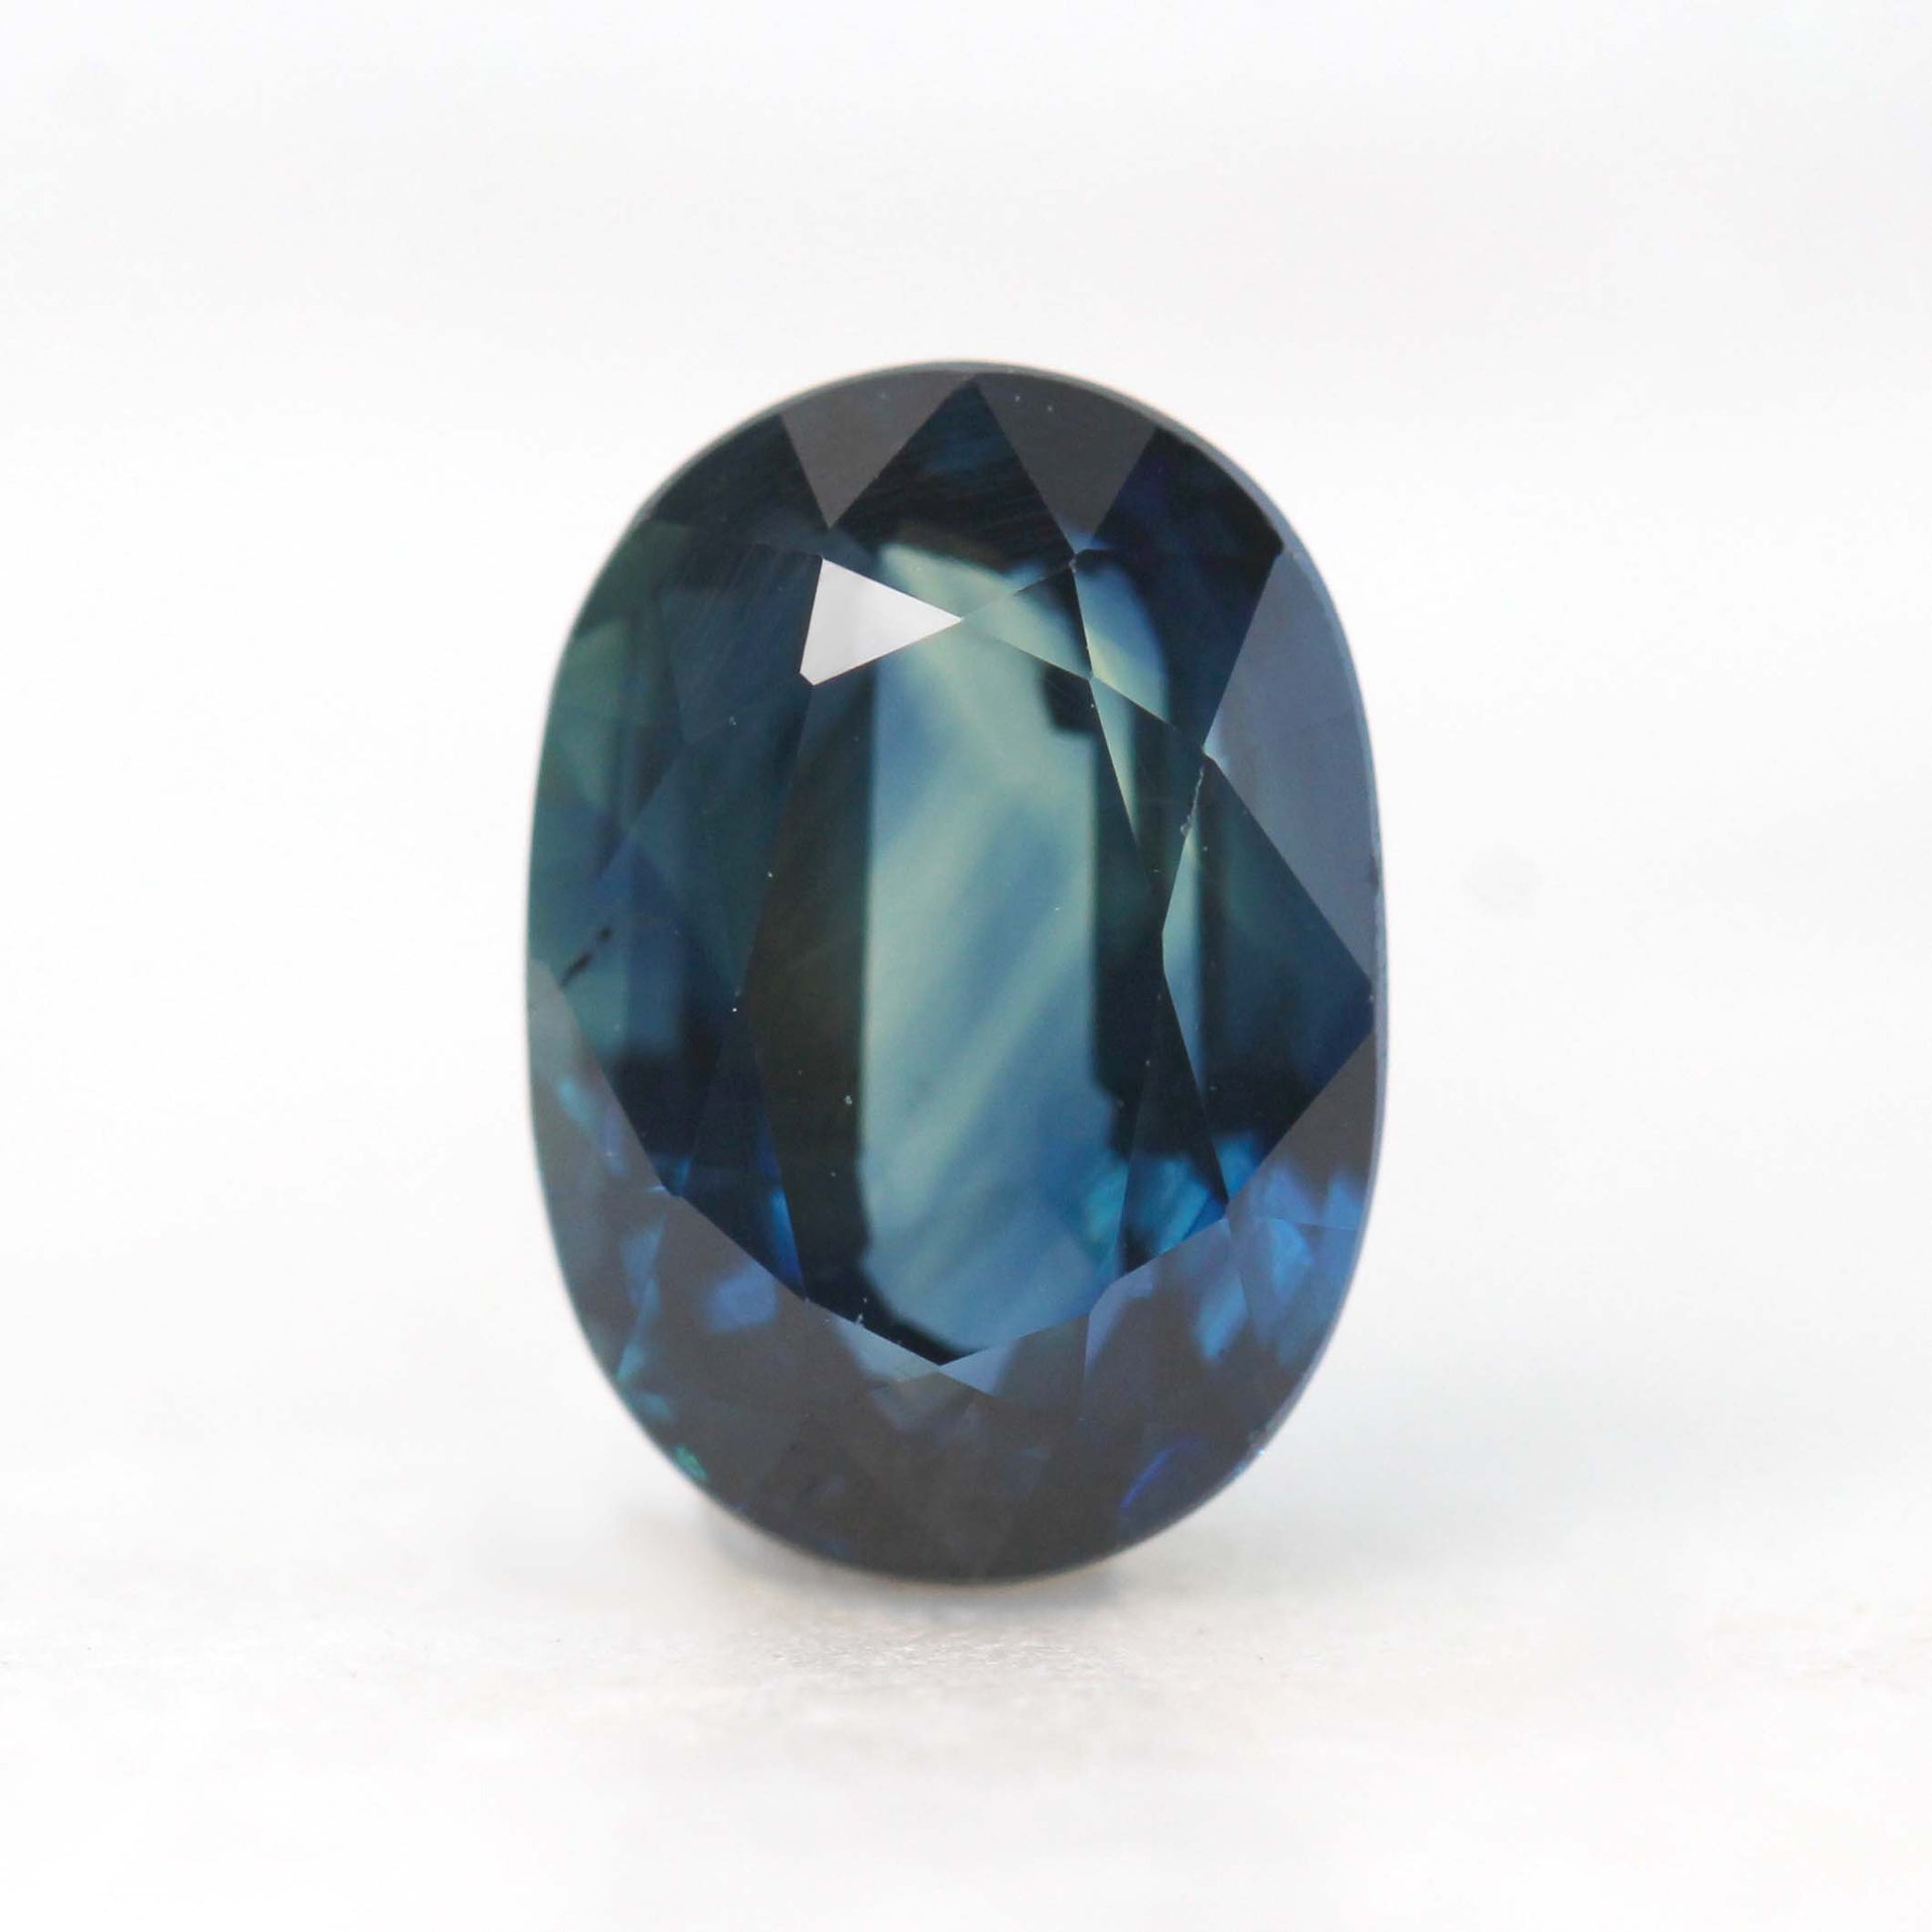 2.73 Carat Teal Blue Oval Sapphire for Custom Work - Inventory Code TBOS273 - Midwinter Co. Alternative Bridal Rings and Modern Fine Jewelry